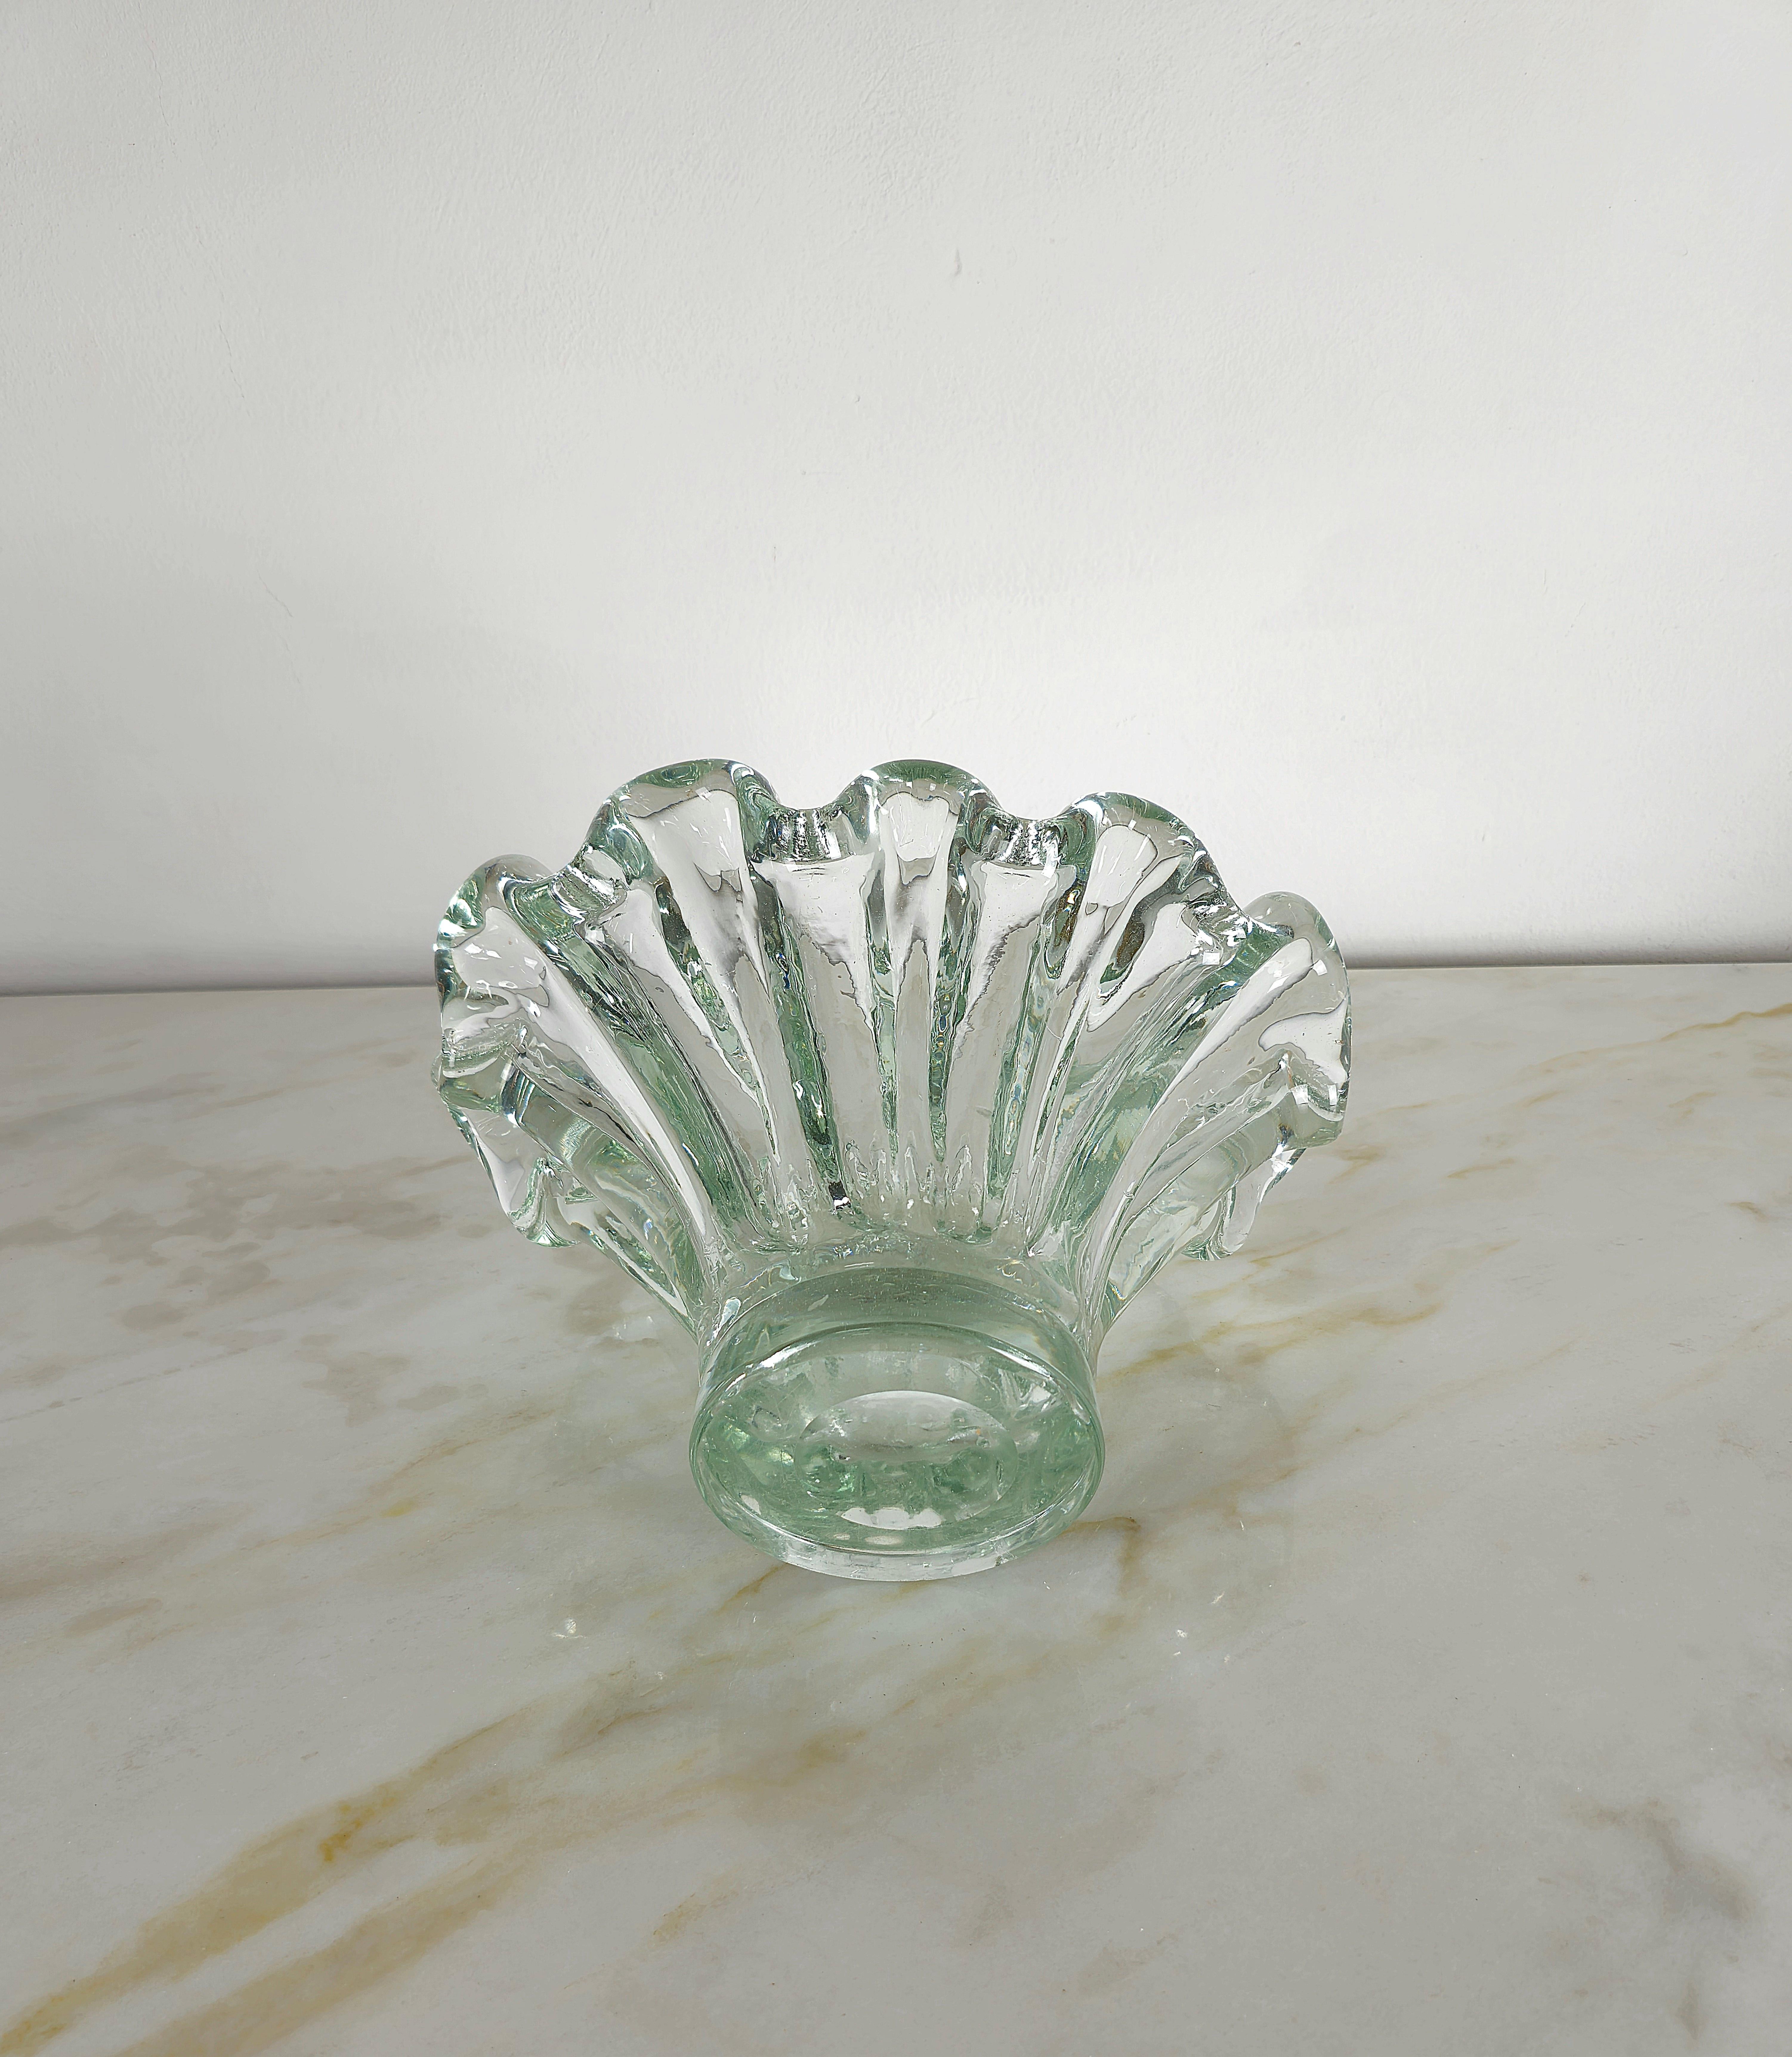 Vase Decorative Object Transparent Murano Glass Large Midcentury Italy 1960s For Sale 4